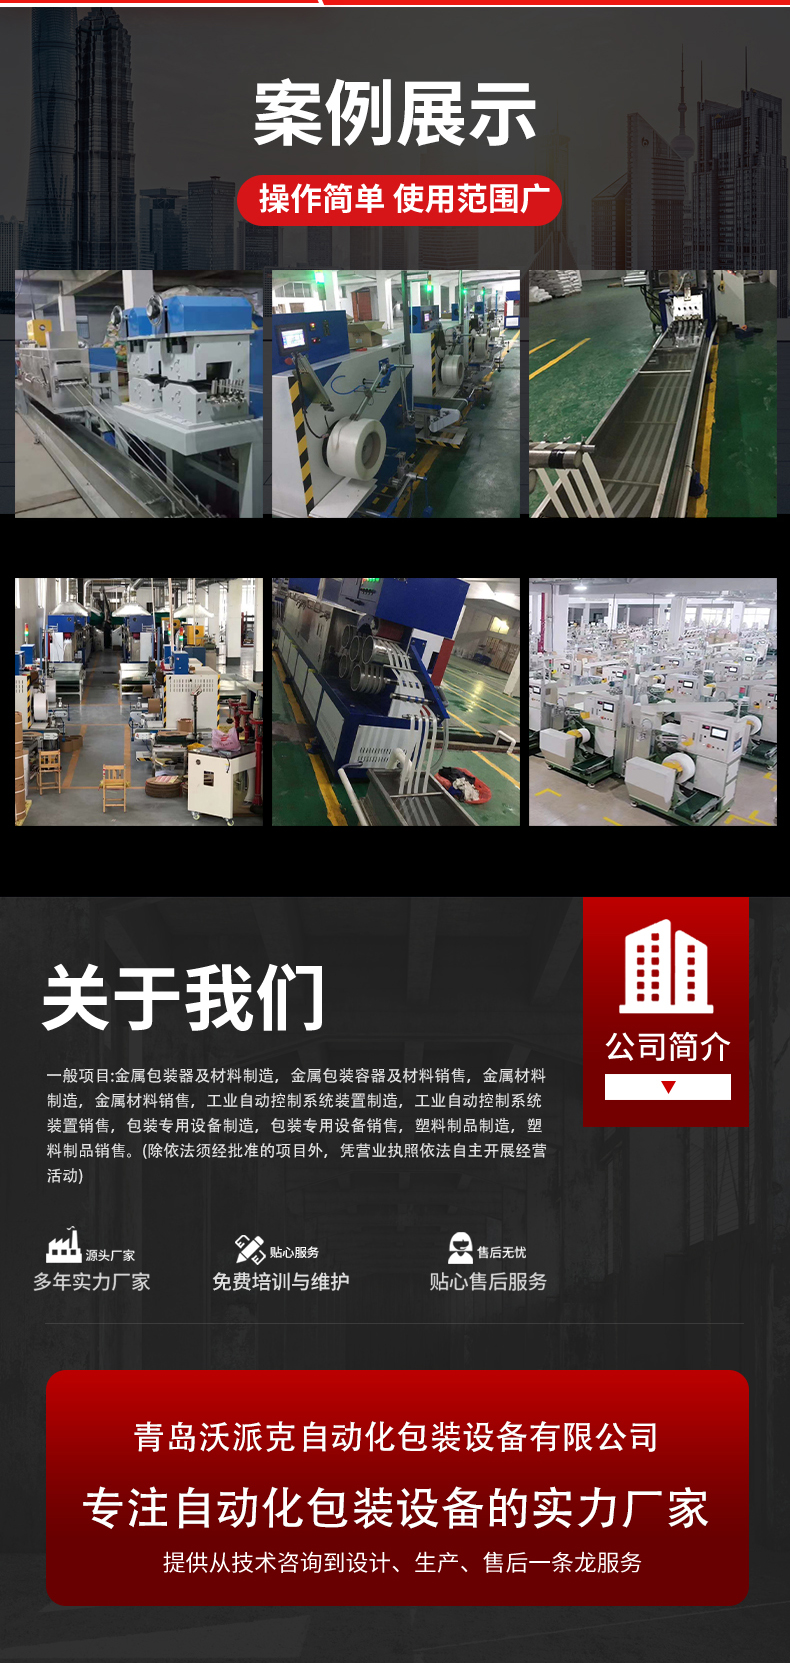 Semi-automatic packaging machine, bundling machine, fast packaging, stronger fastness, various specifications used in the electronic factory industry